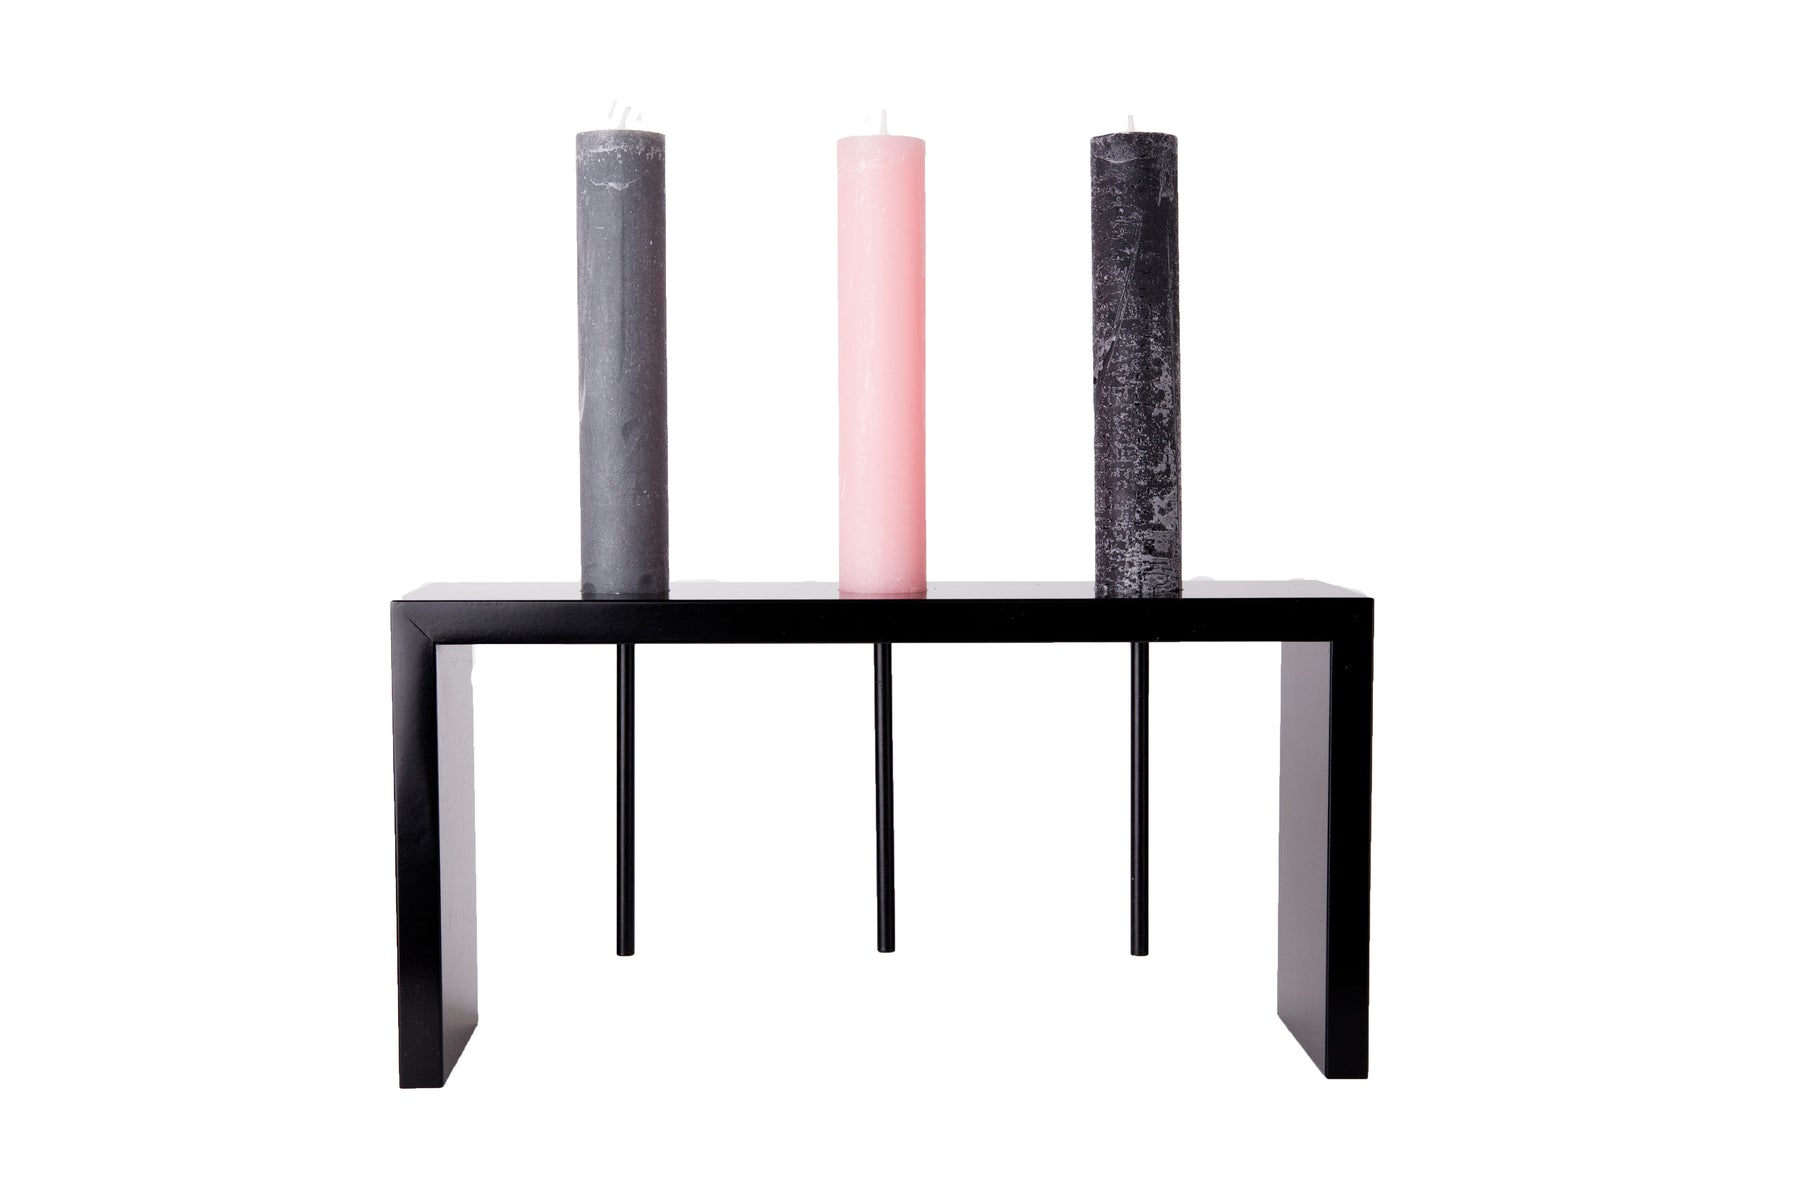 Tochi Black Candle